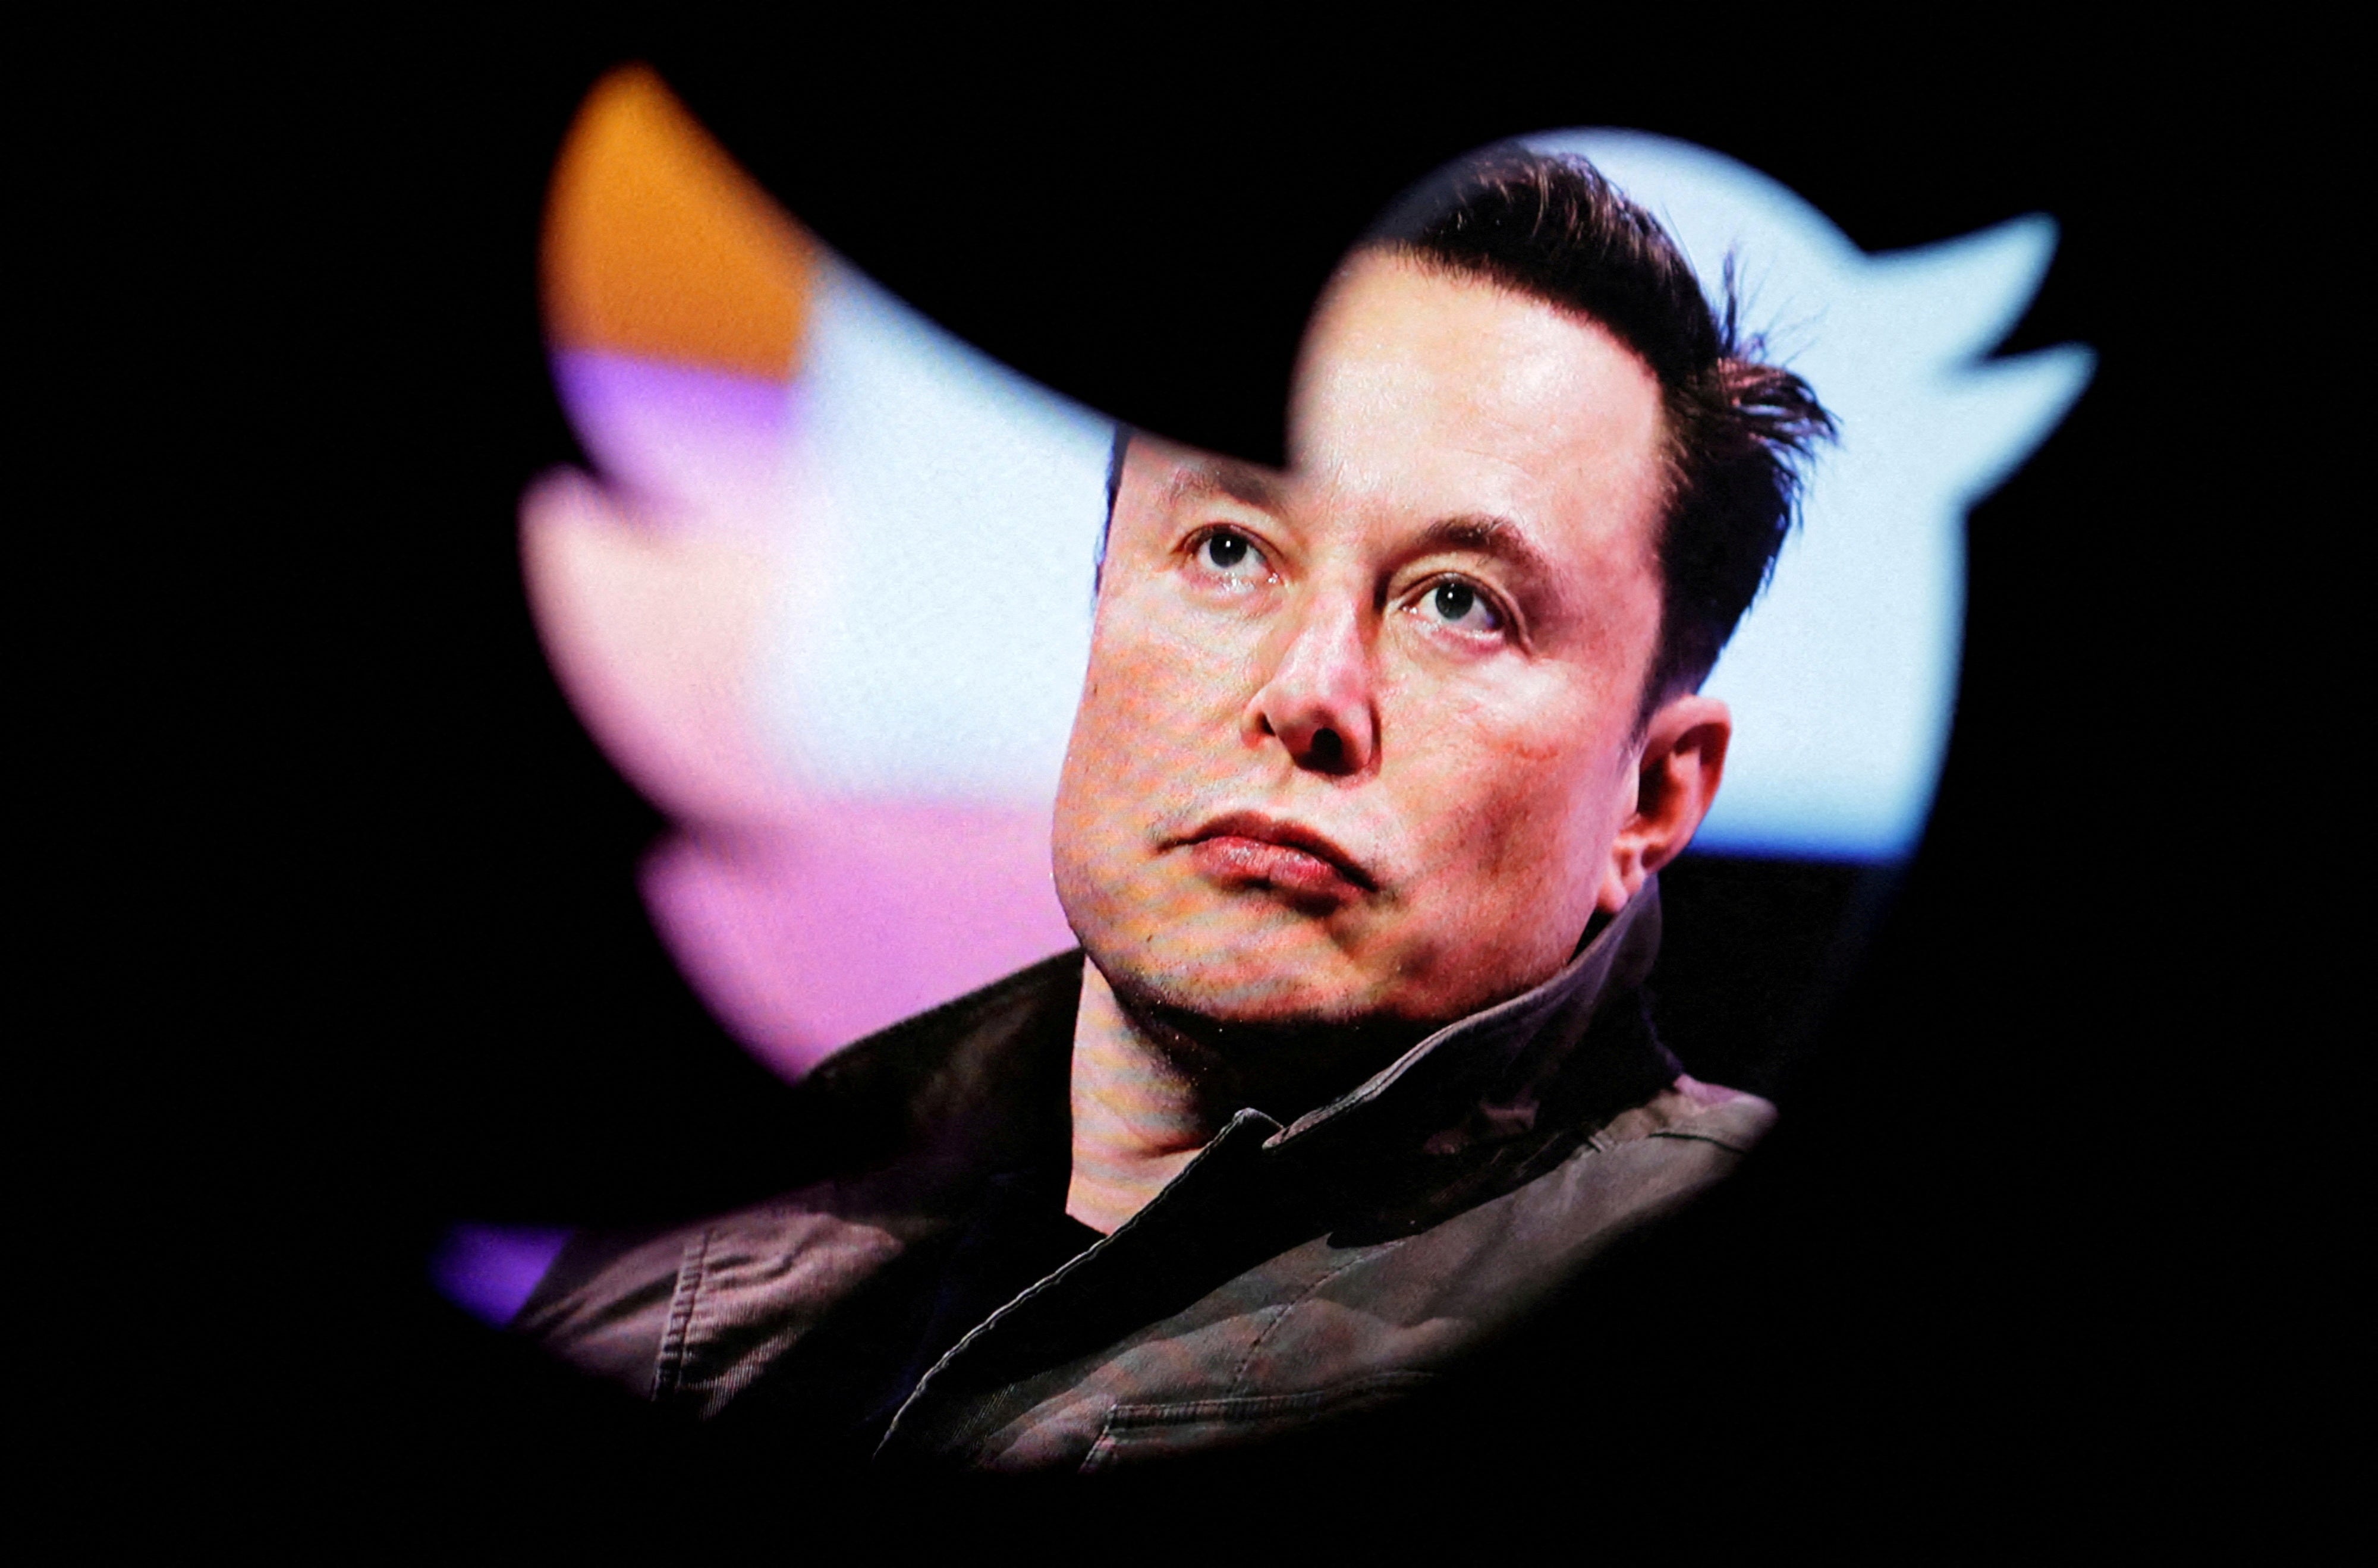 Elon Musk’s photo is seen through a Twitter logo in this illustration taken on 28 October